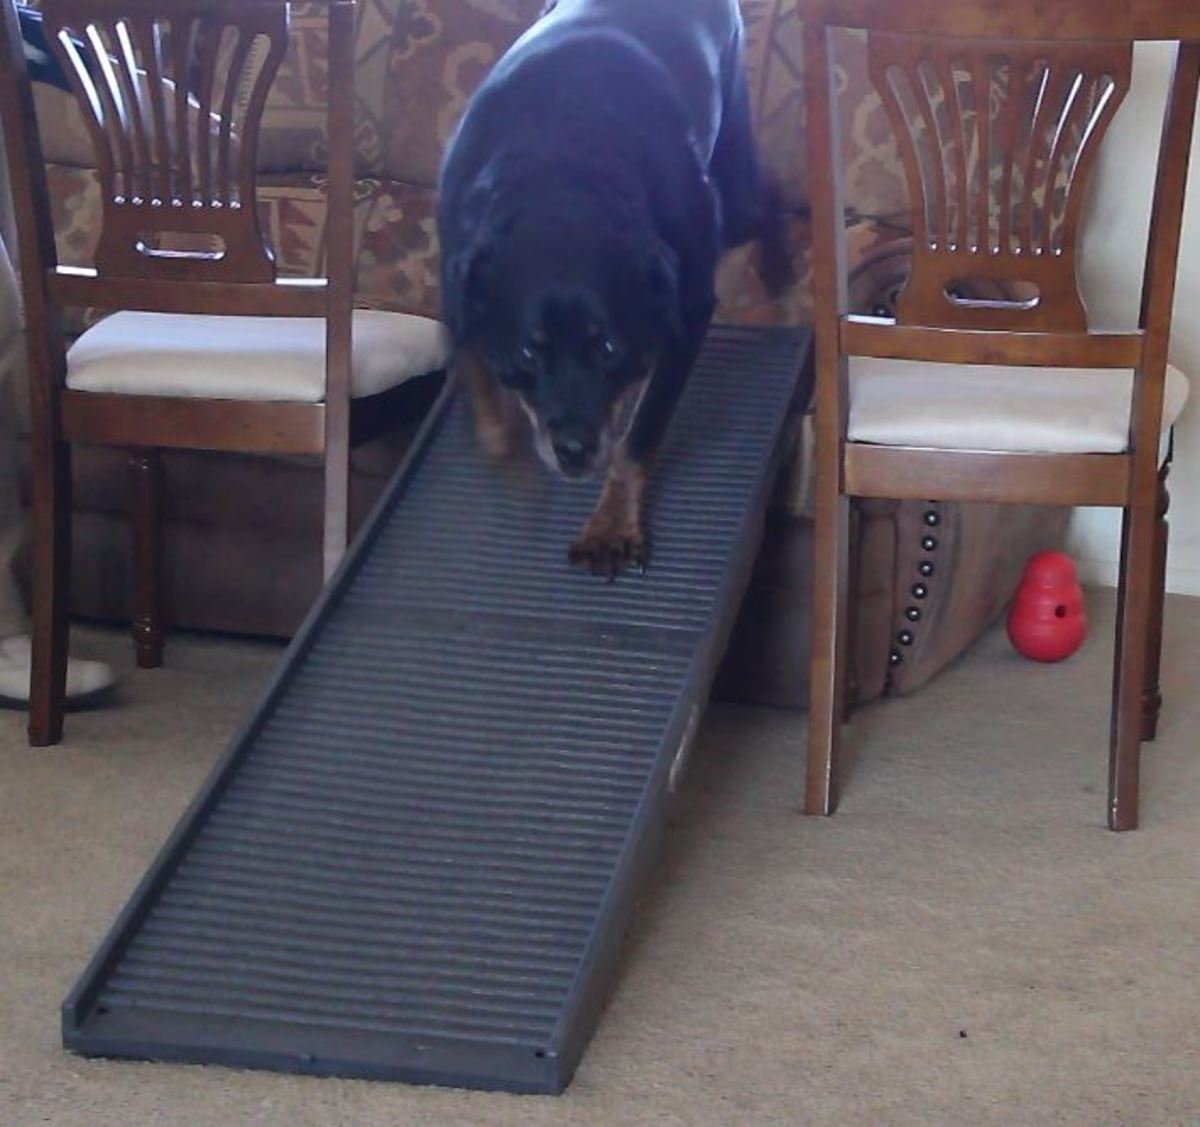 Kaiser practicing with the couch. The chairs here help prevent him from jumping off the sides.